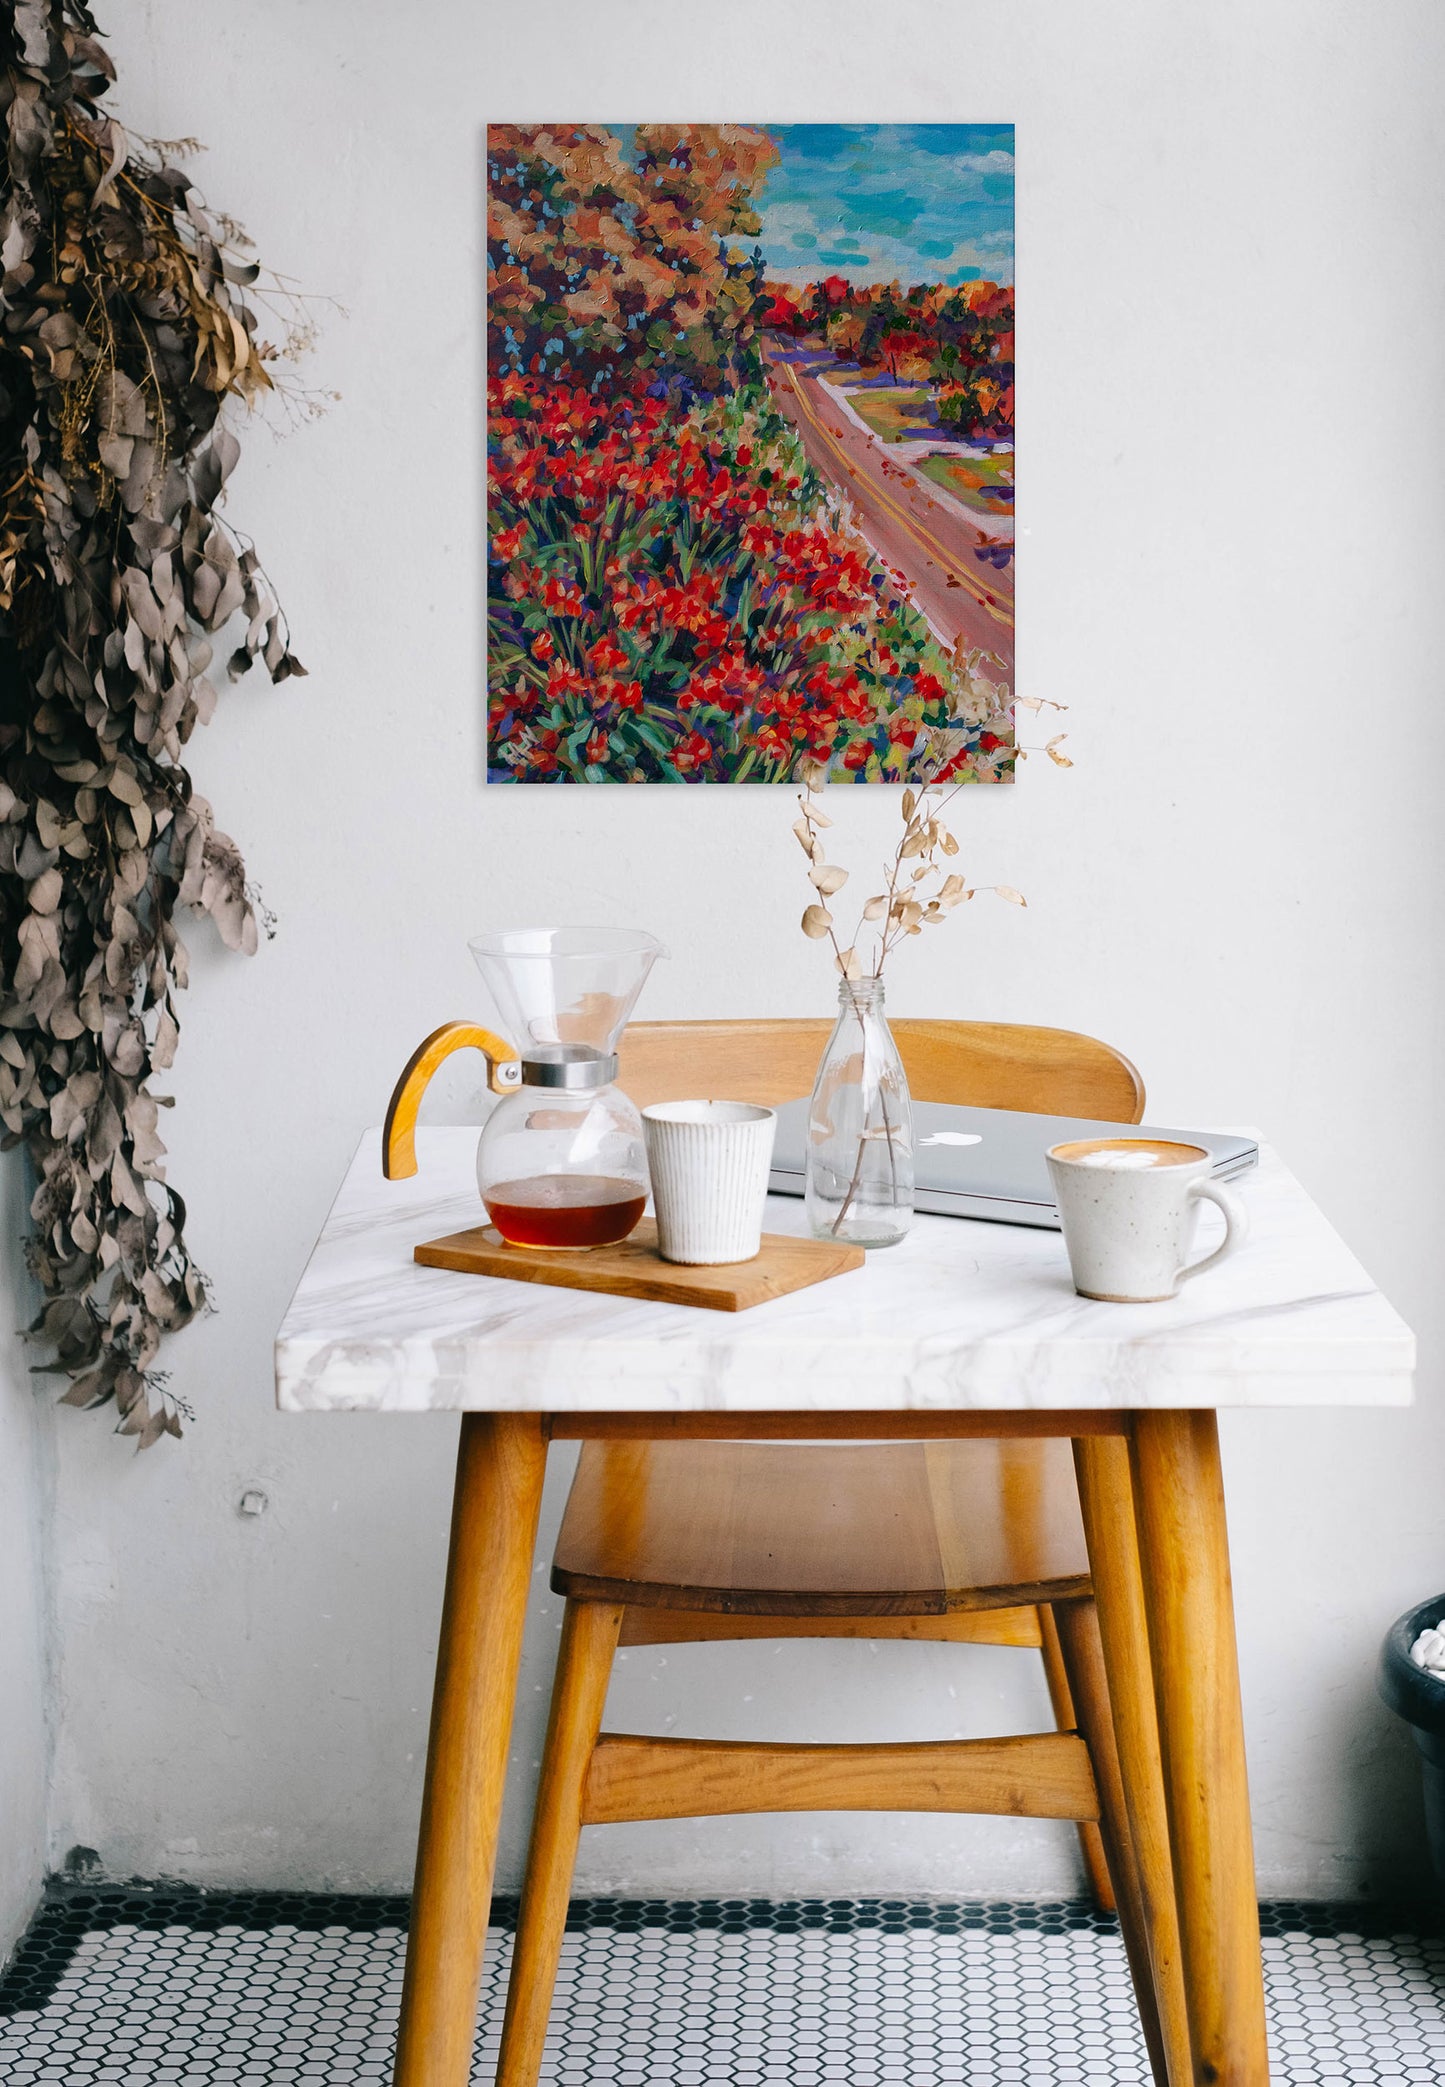 tiger lily painting and breakfast table